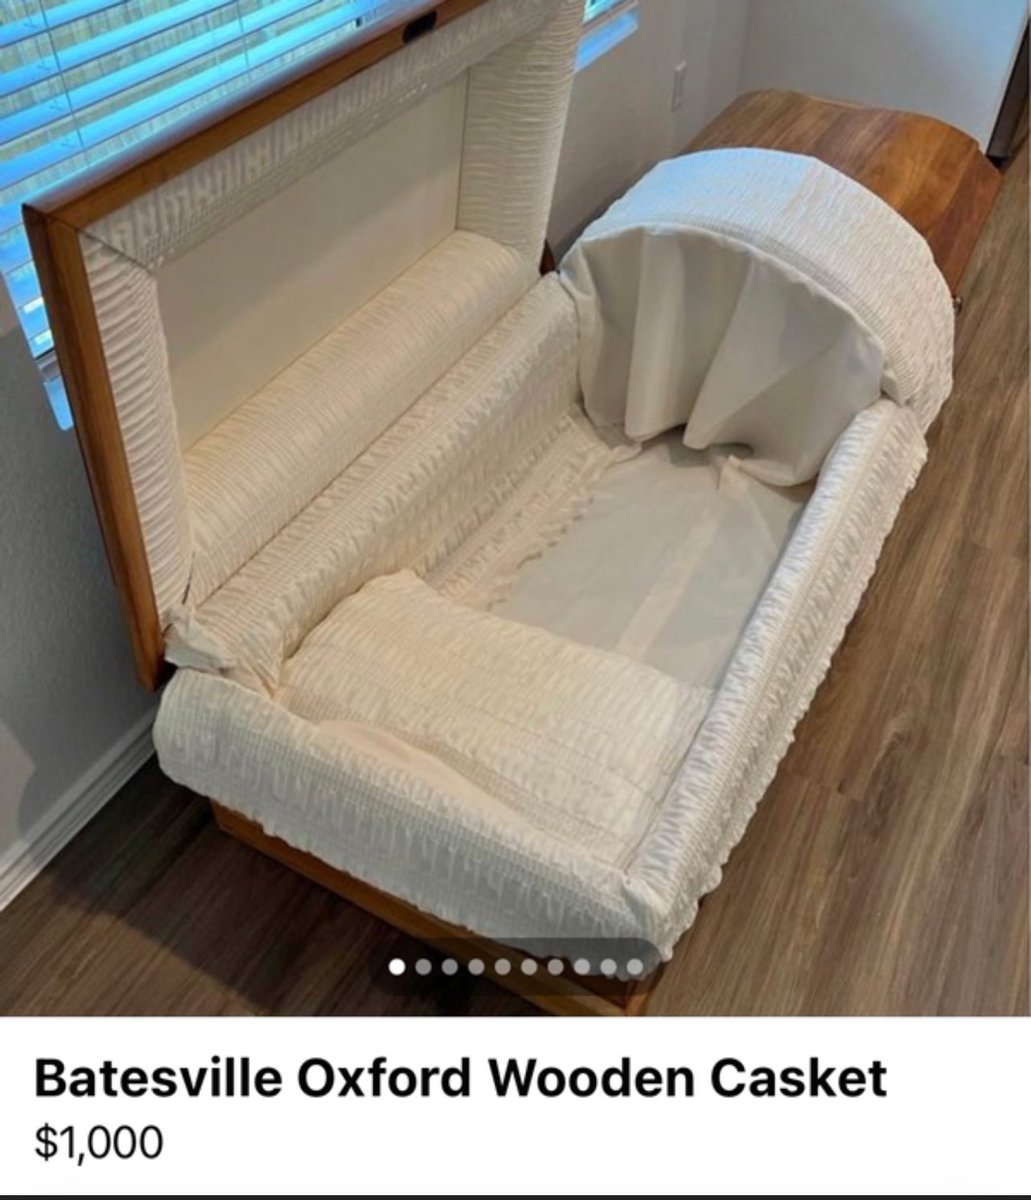 Facebook Marketplace is stepping up what you can purchase. #Facebook #Facebookmarket